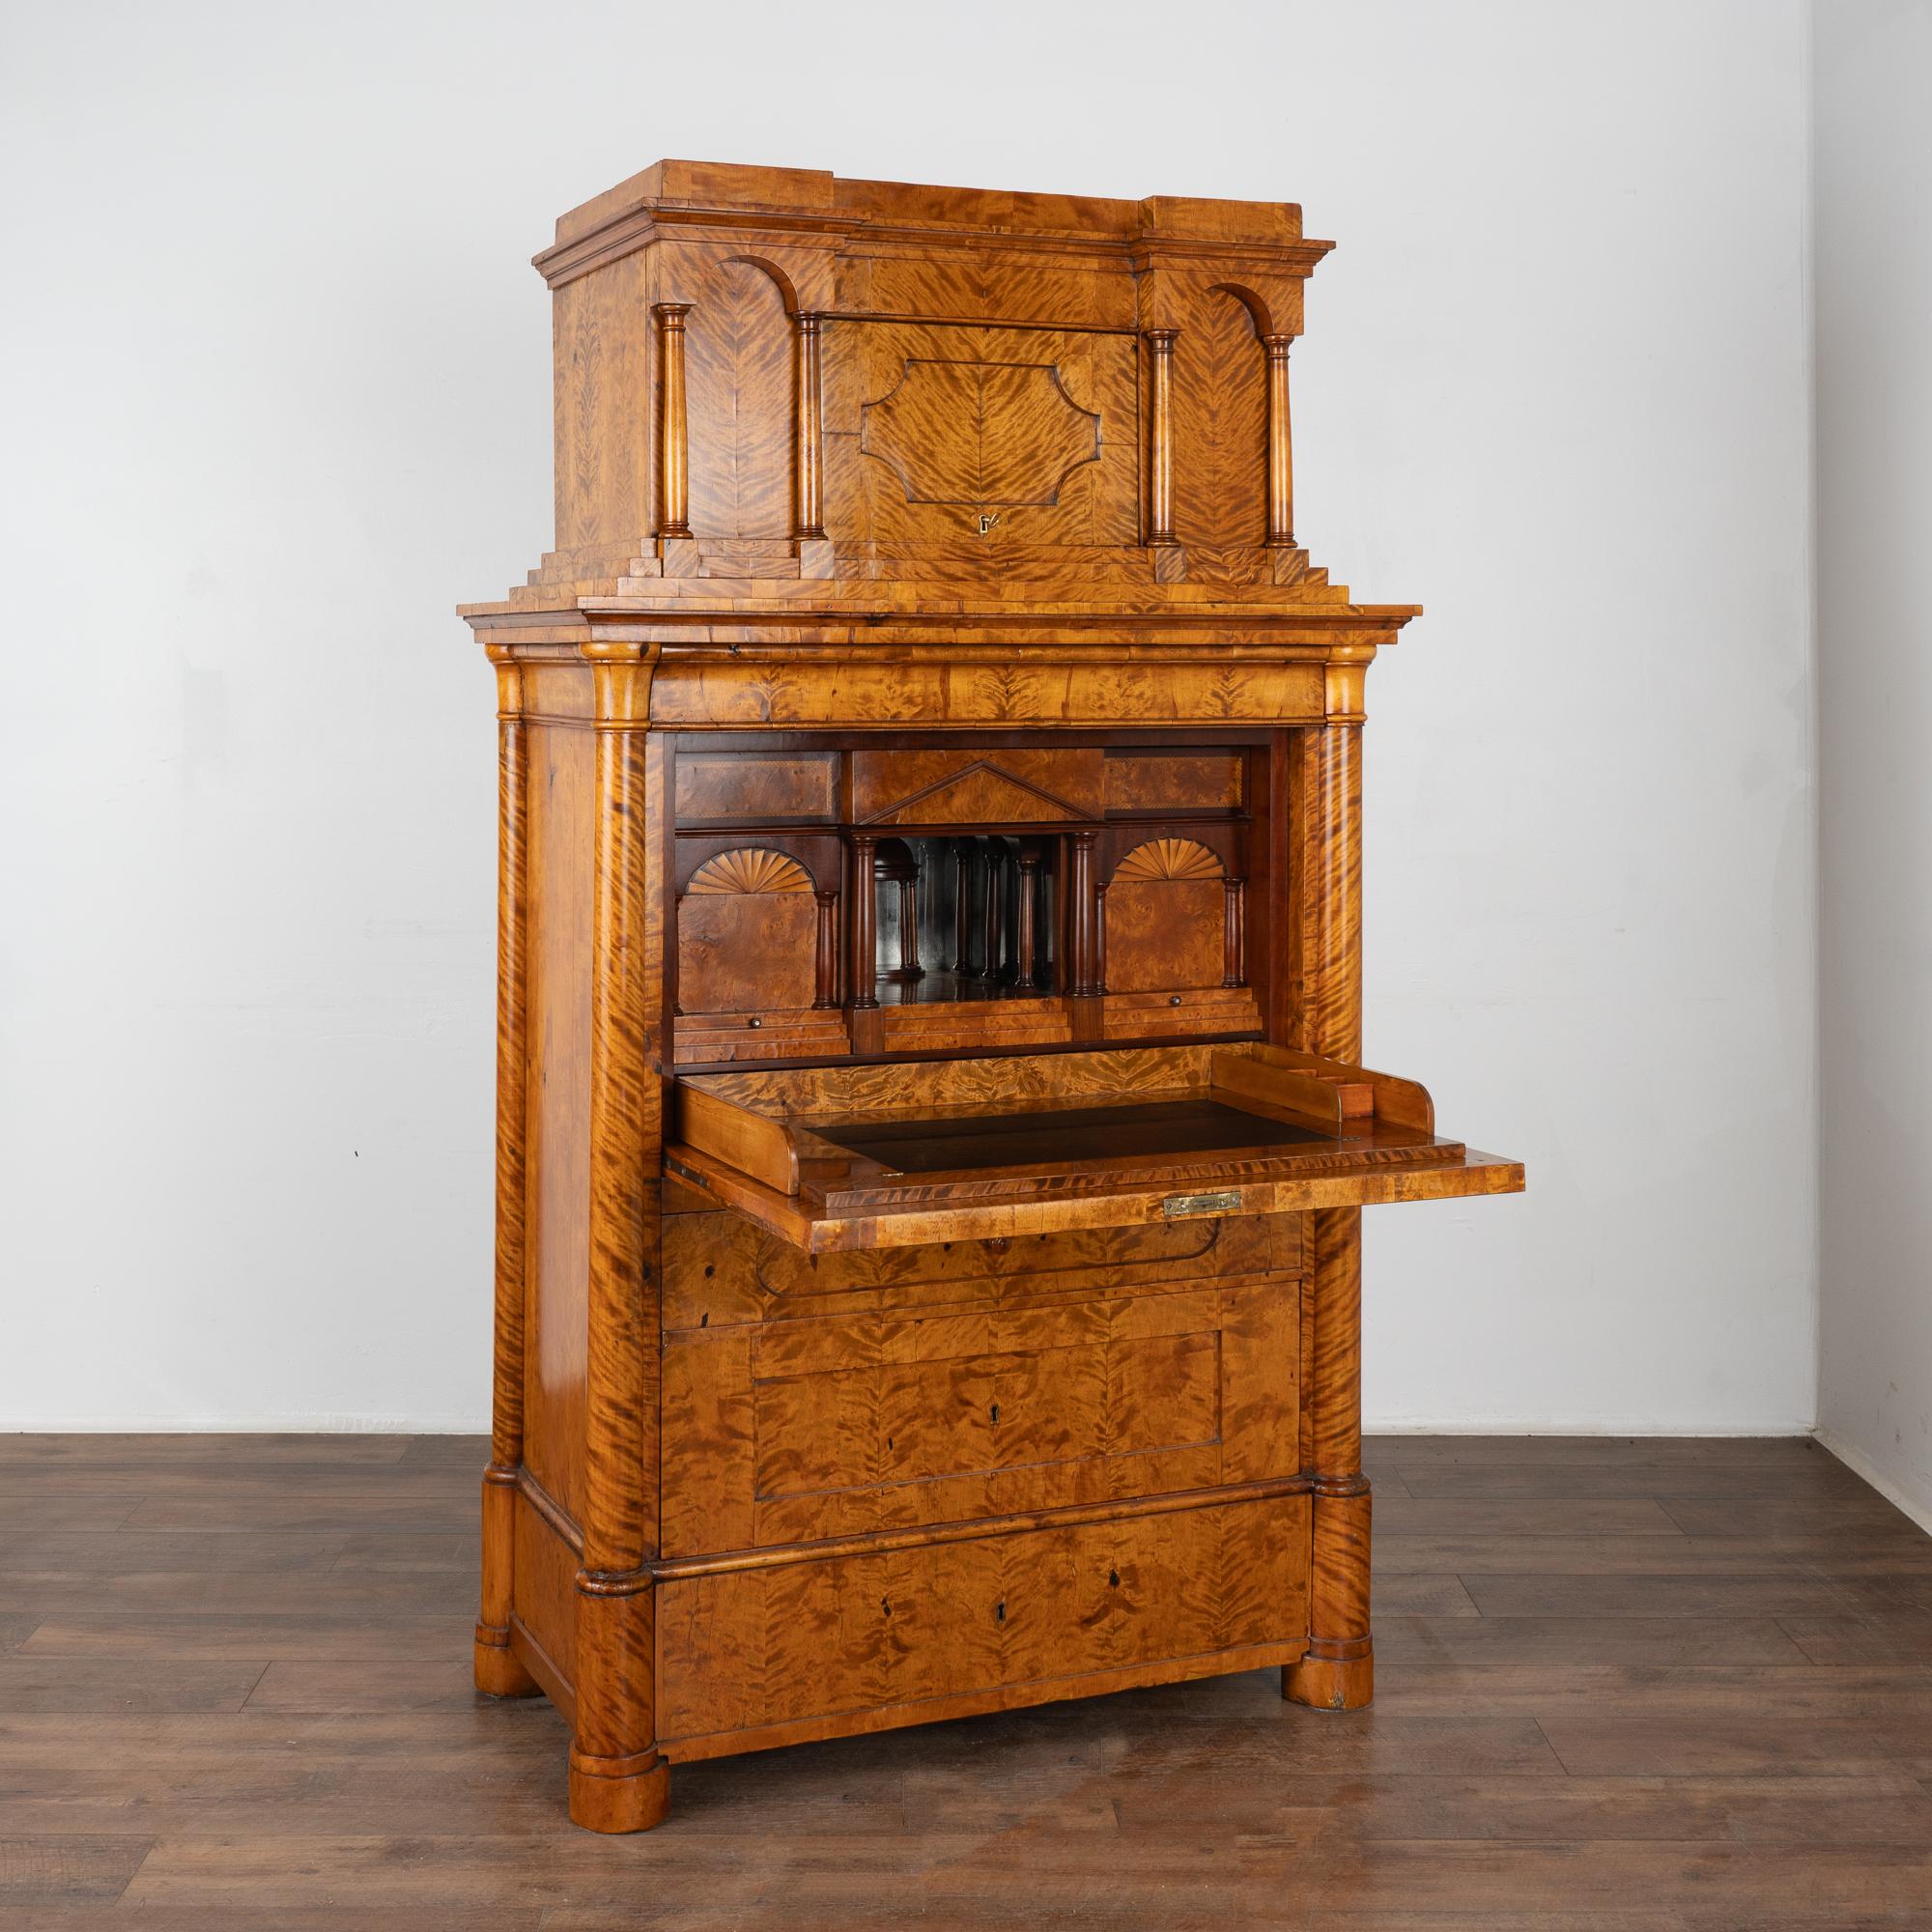 Rich birch and stately lines define this handsome Biedermeier drop front secretary.
Refer to close up photos to appreciate the stunning grain pattern of the flame birch veneer.
Multiple interior drawers and hidden storage areas are accented by the